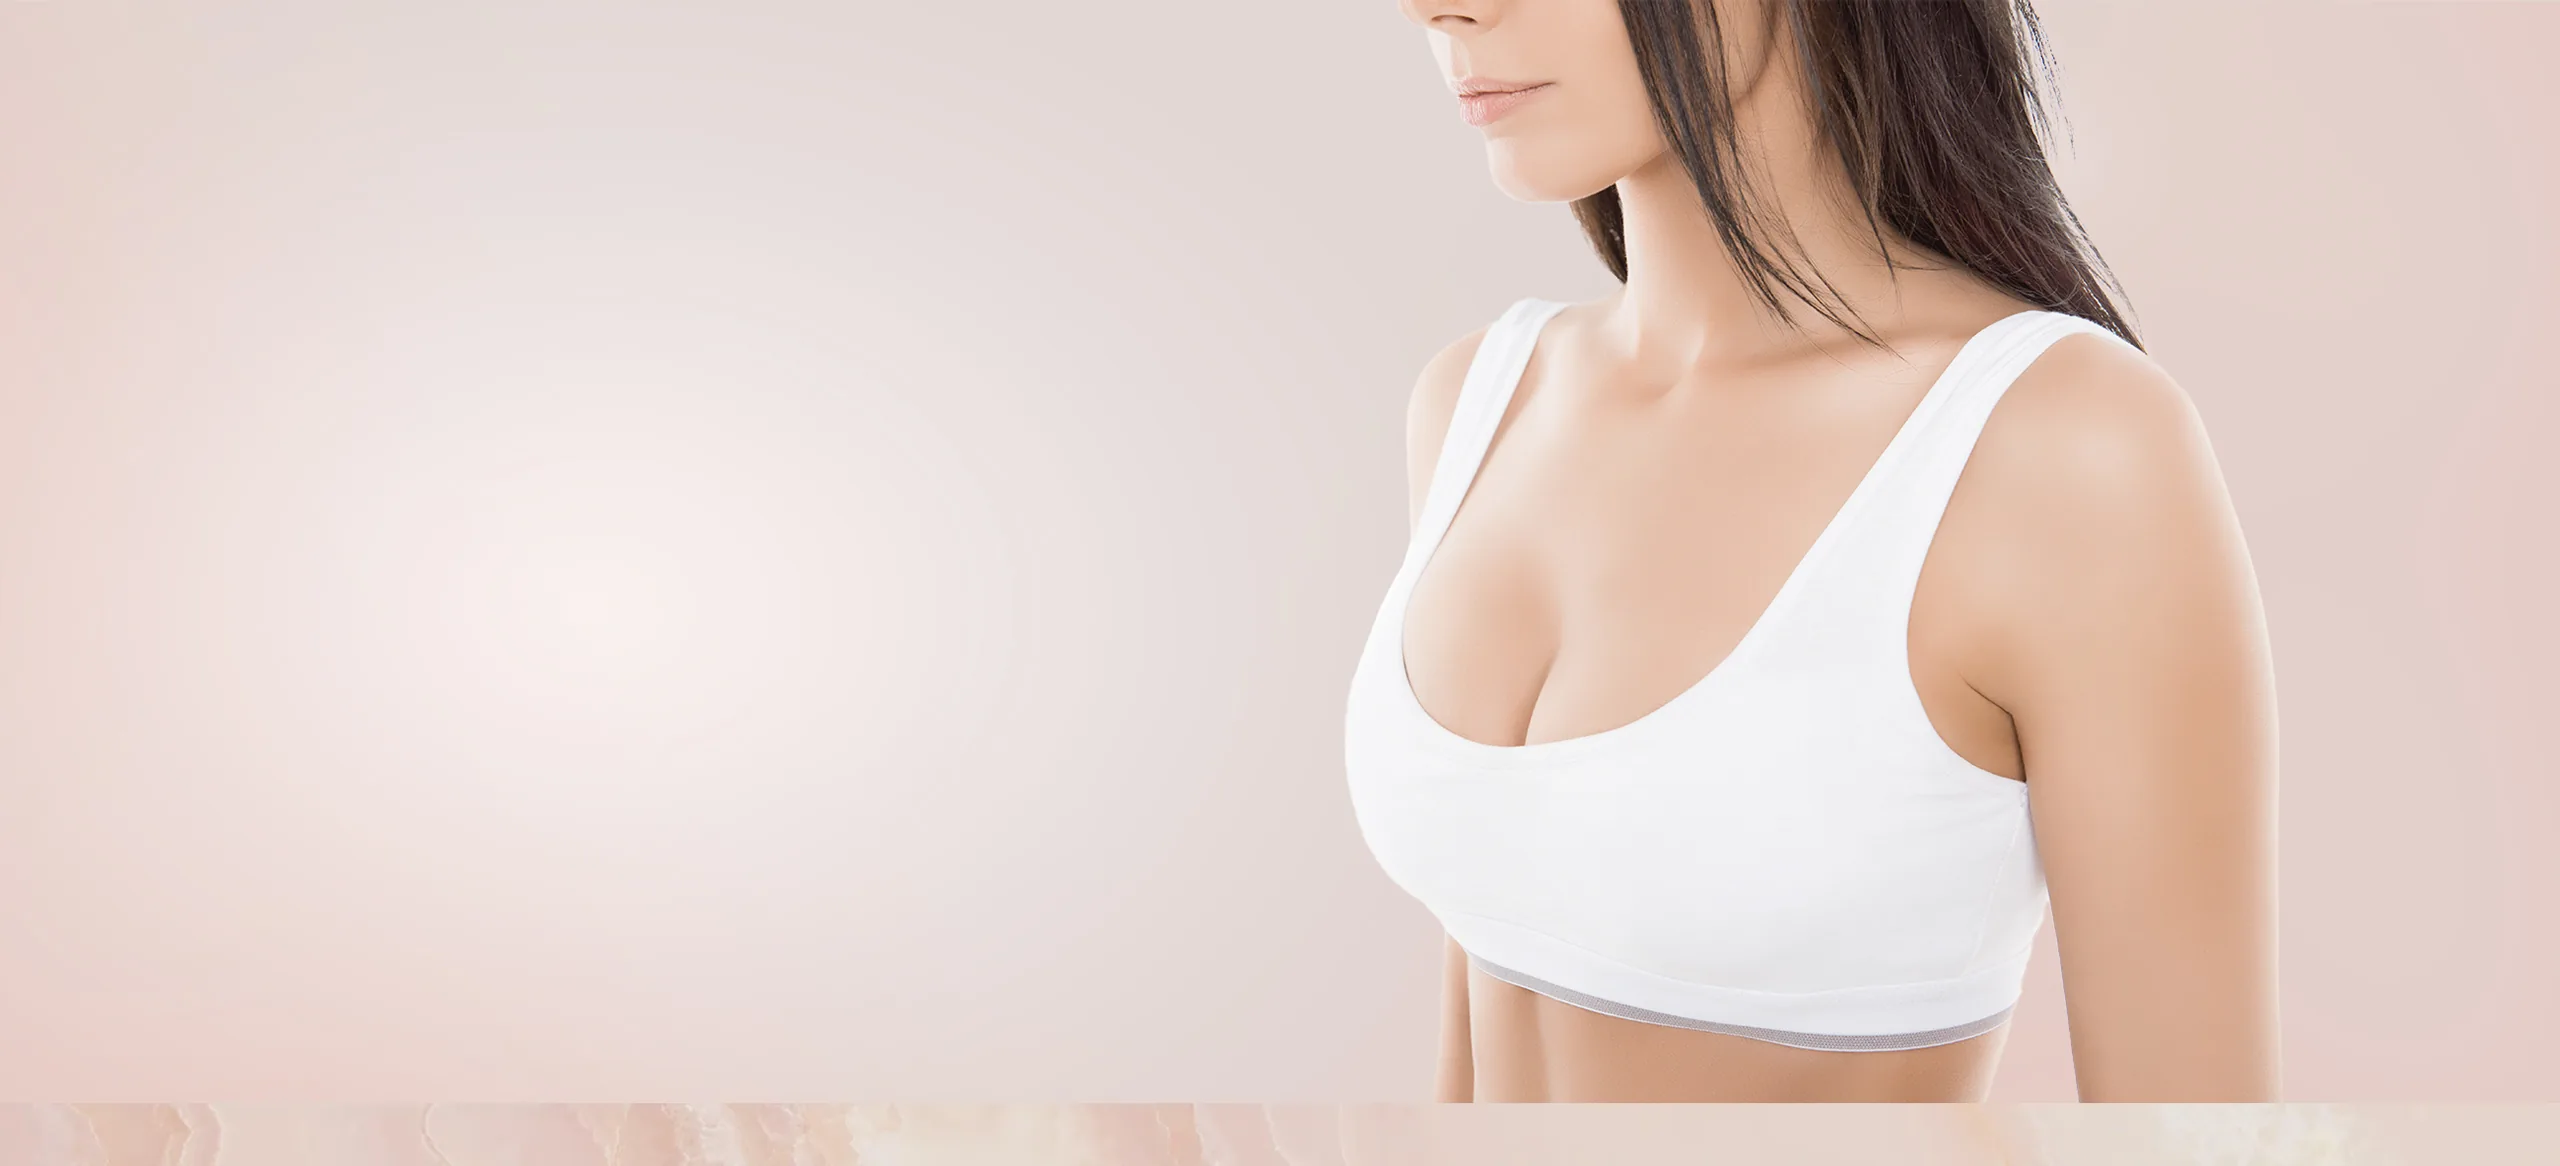 Breast Reduction & Asymmetry Patient – 175